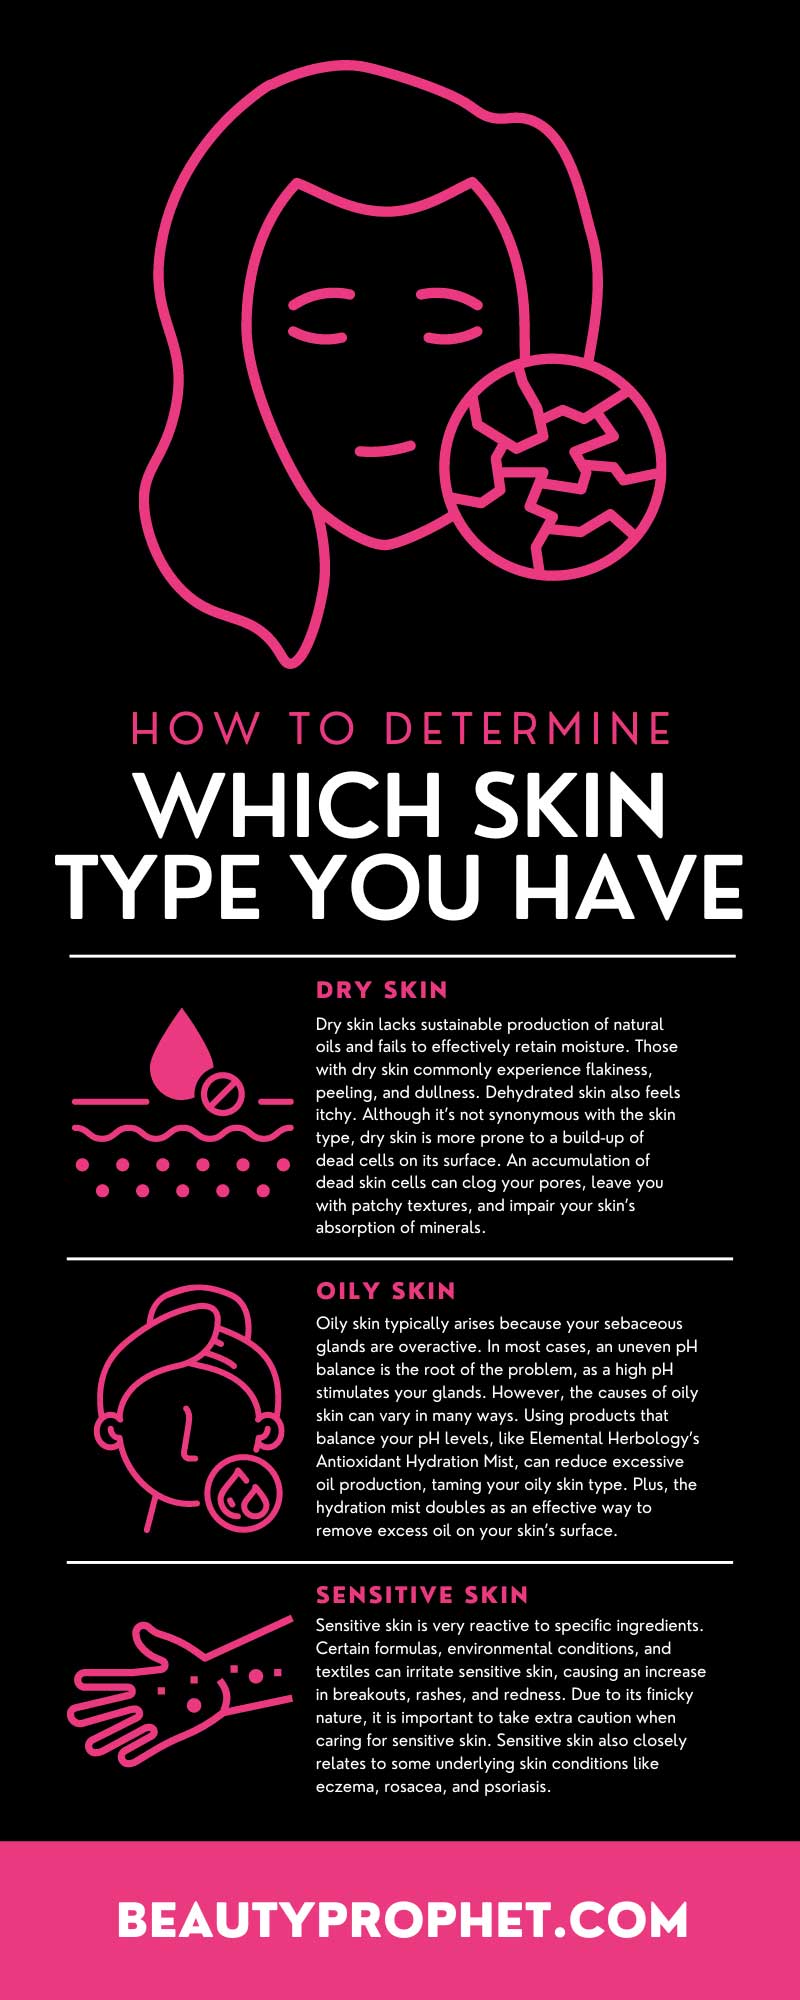 How To Determine Which Skin Type You Have